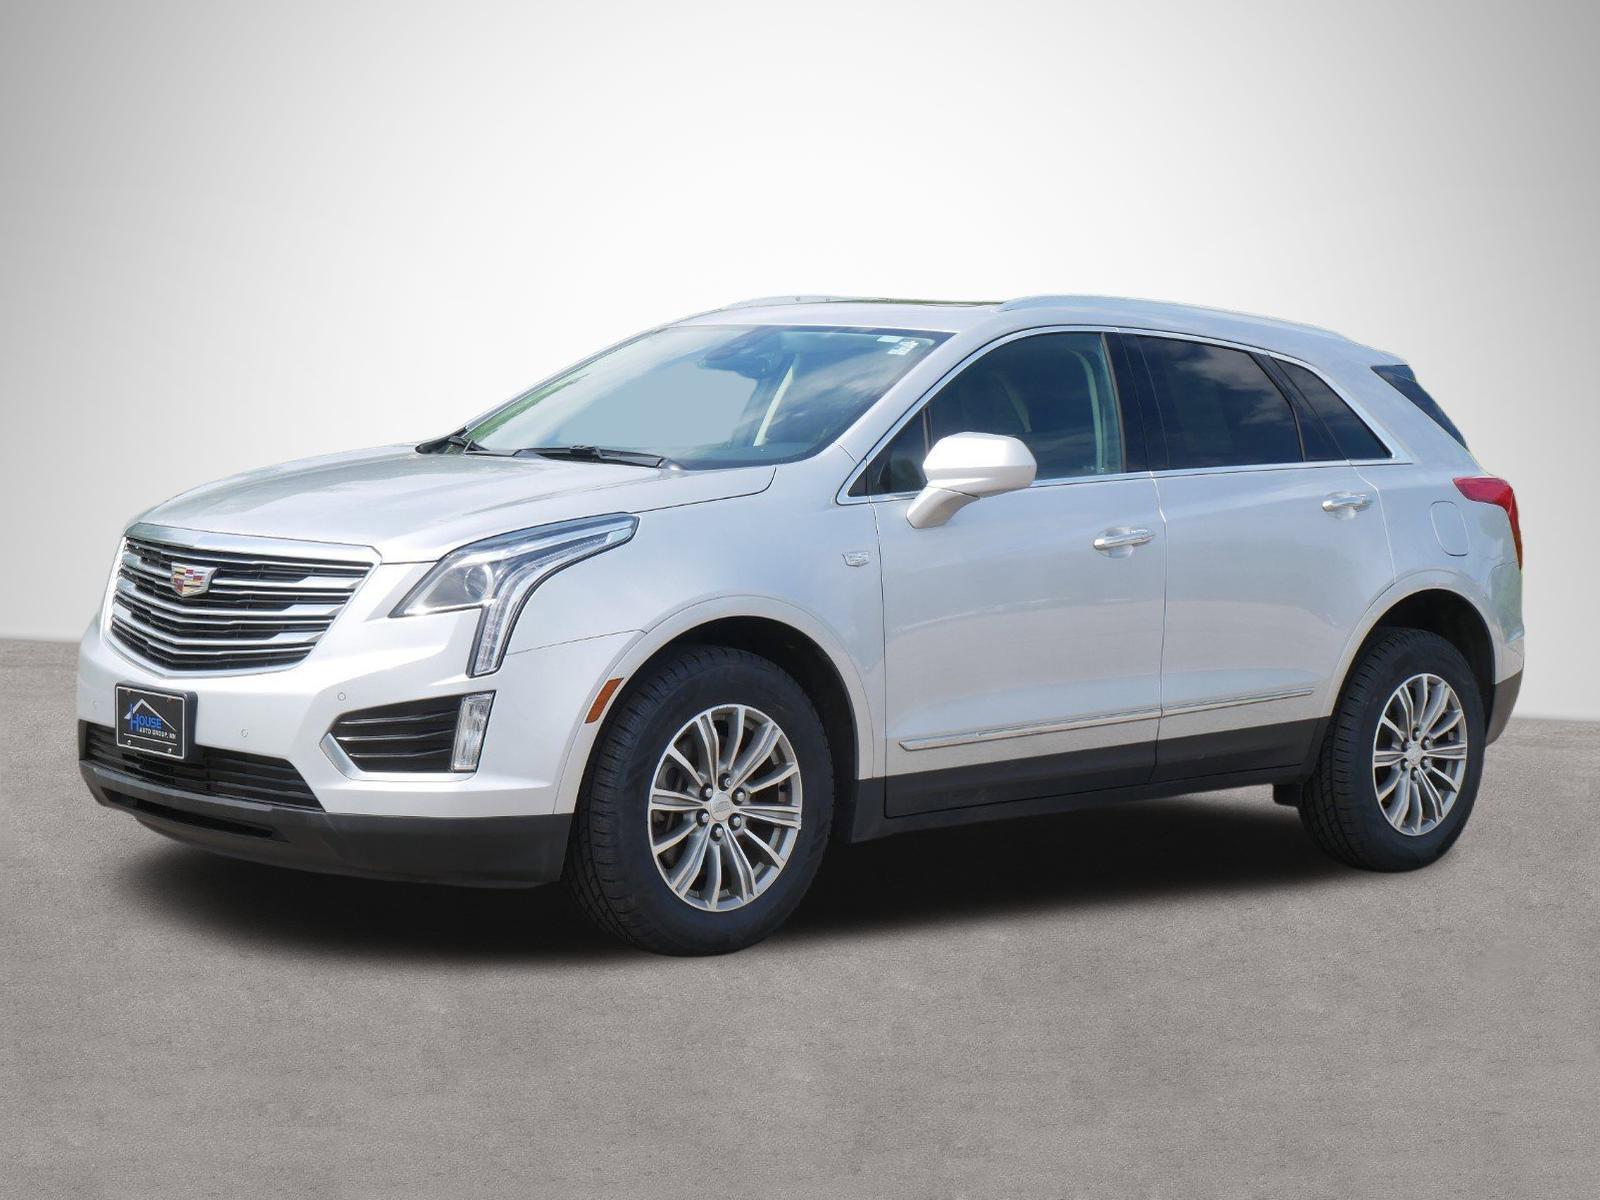 Used 2017 Cadillac XT5 Luxury with VIN 1GYKNDRS0HZ164498 for sale in Red Wing, Minnesota